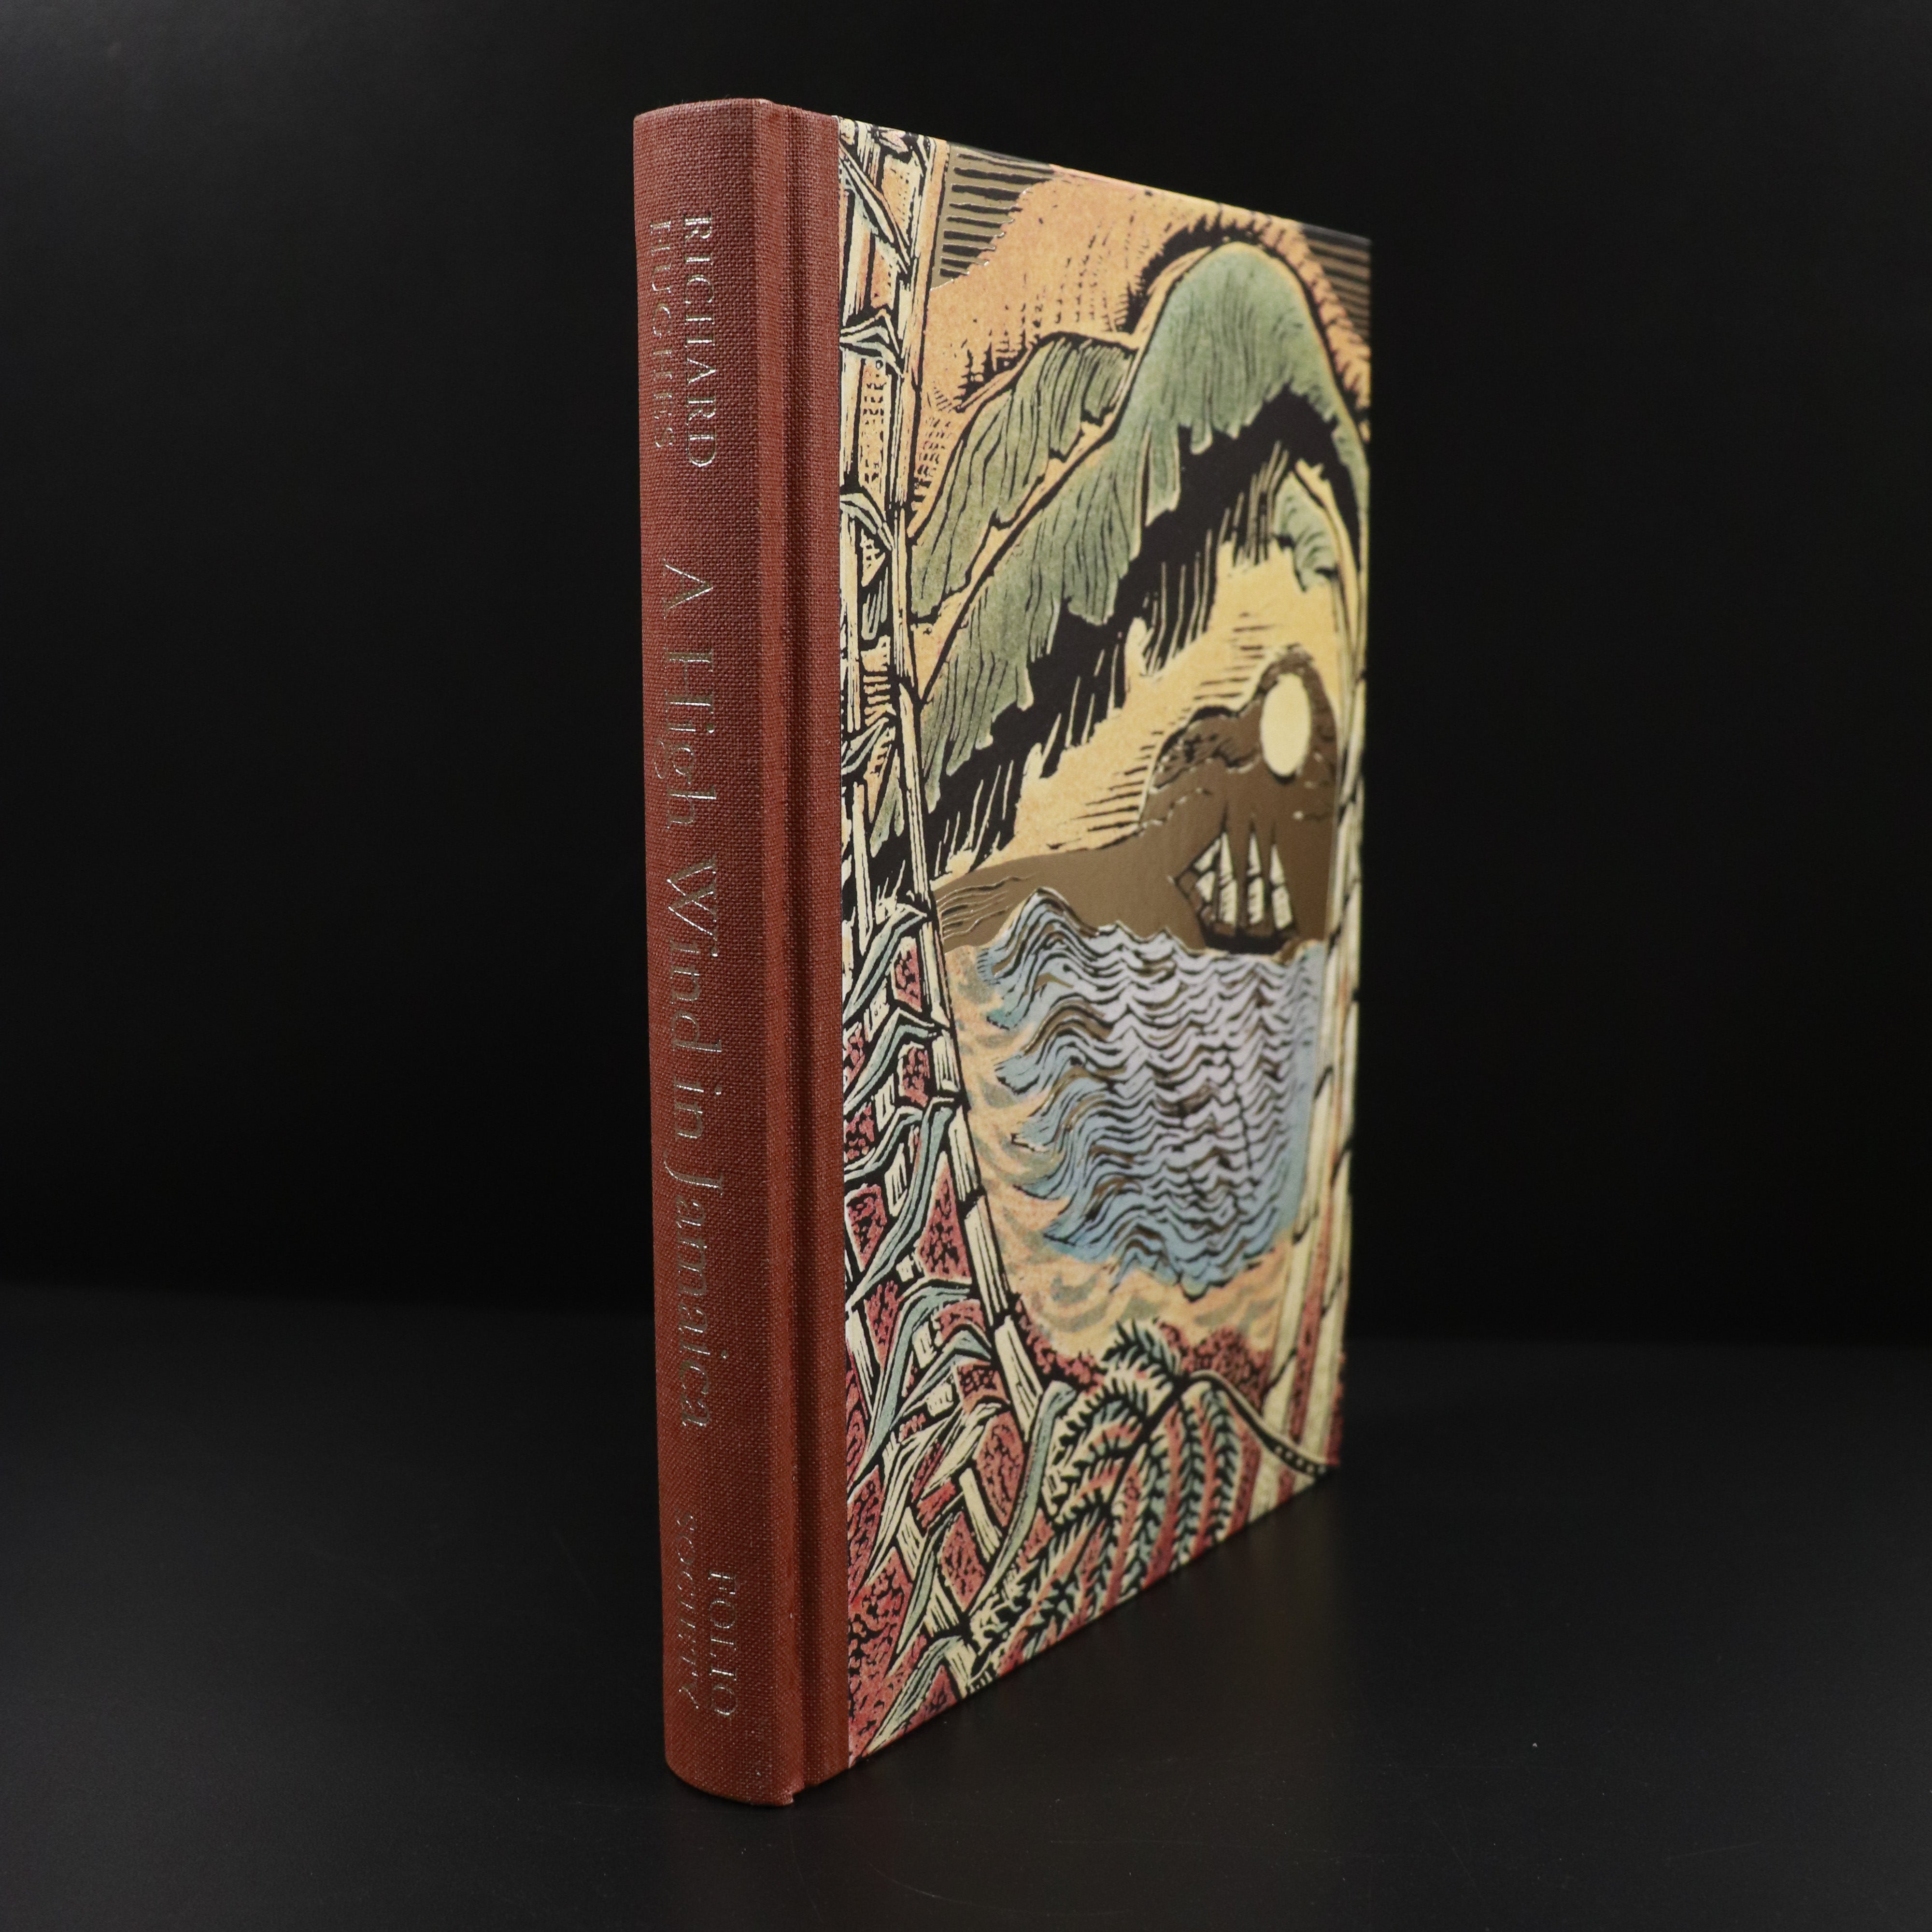 A High Wind In Jamaica by Richard Hughes - 2005 - Folio Society Fiction Book